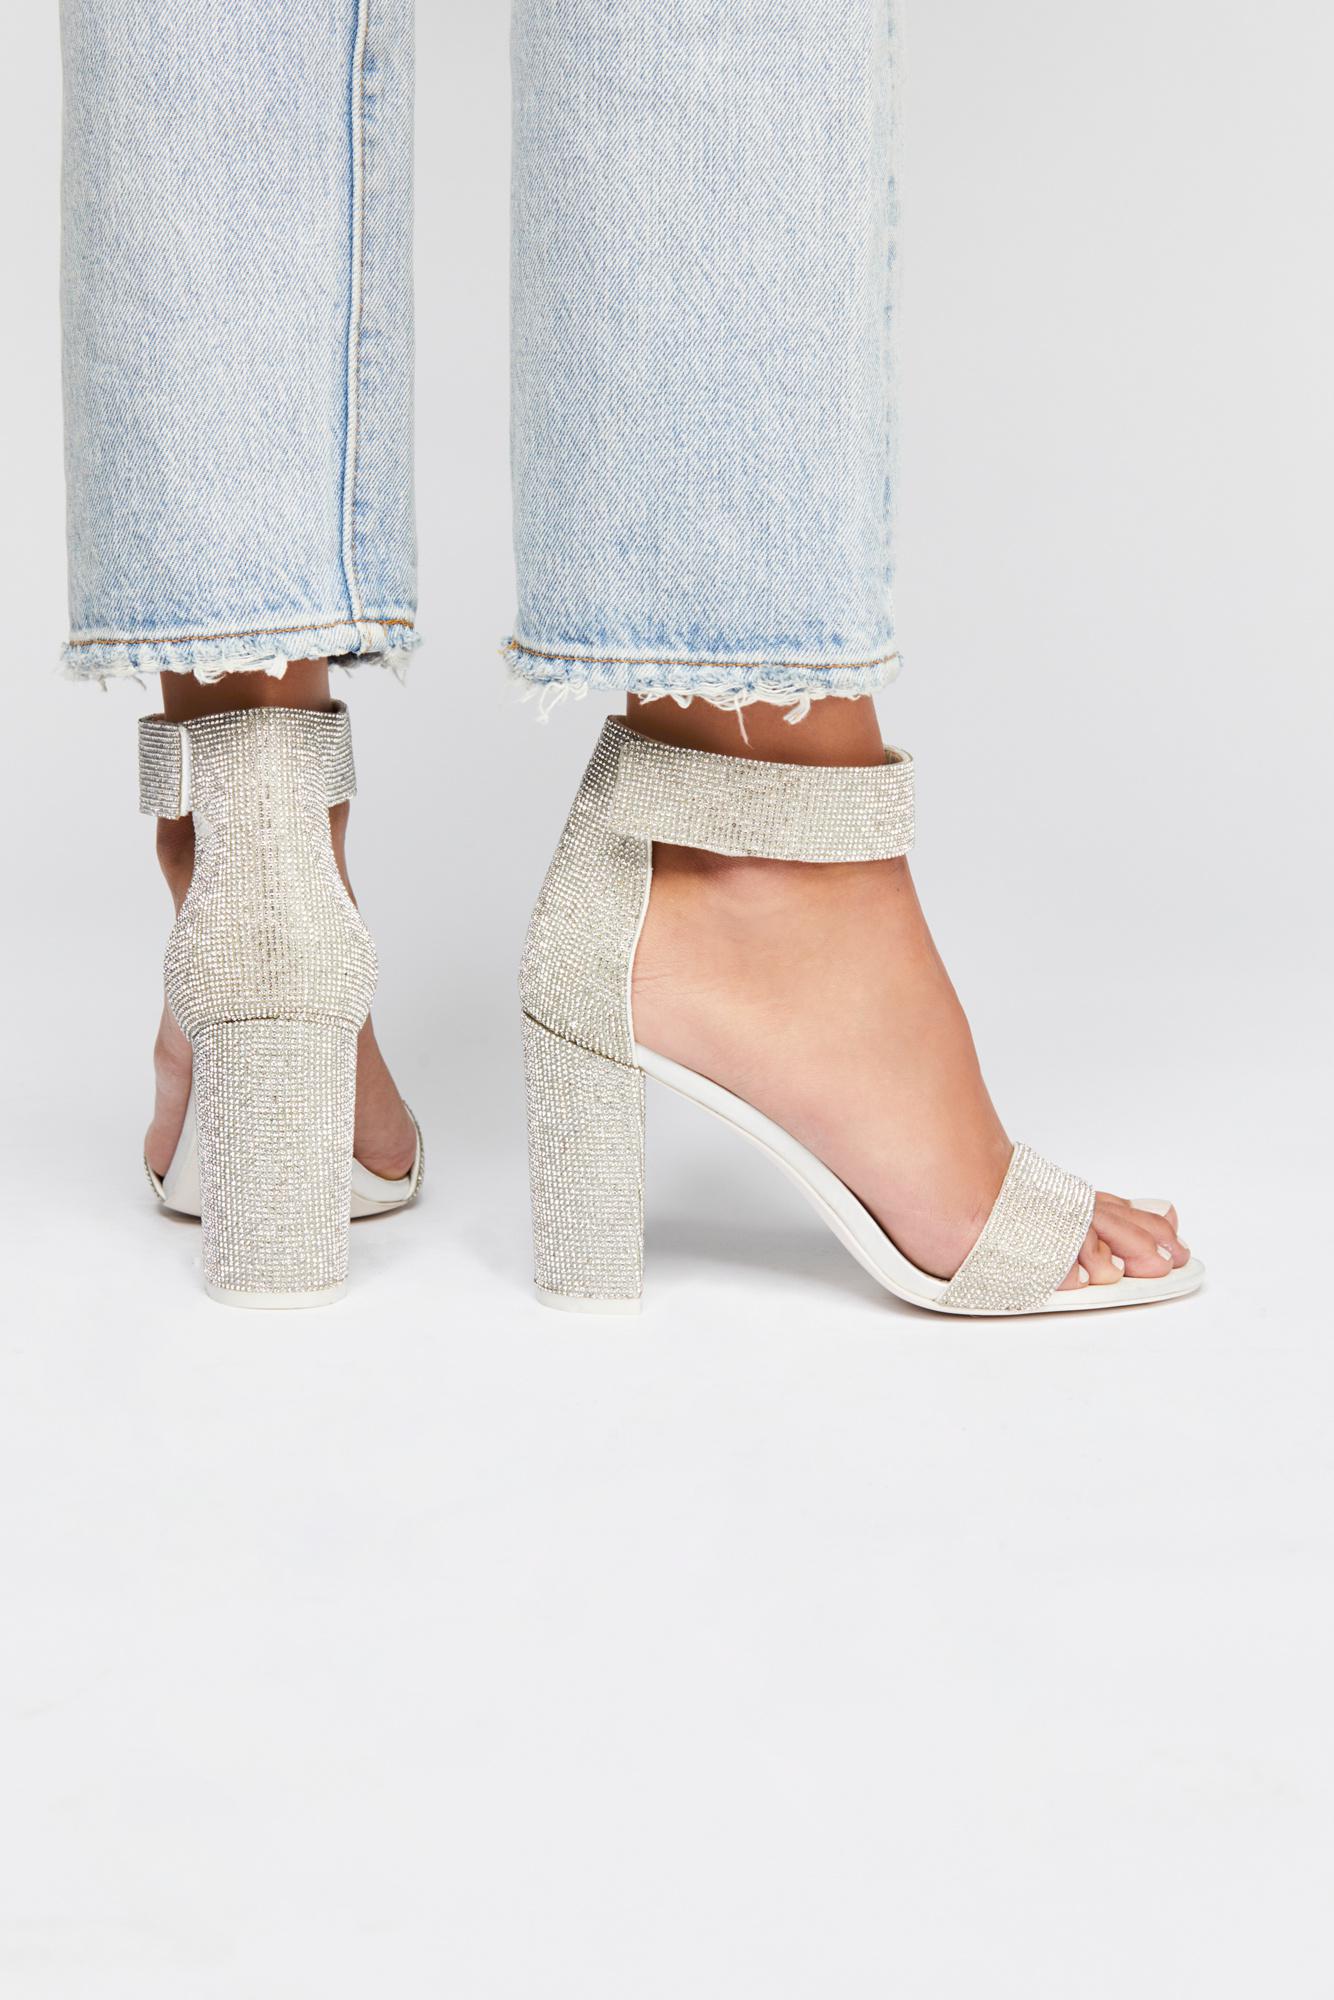 sparkle and shine heel jeffrey campbell